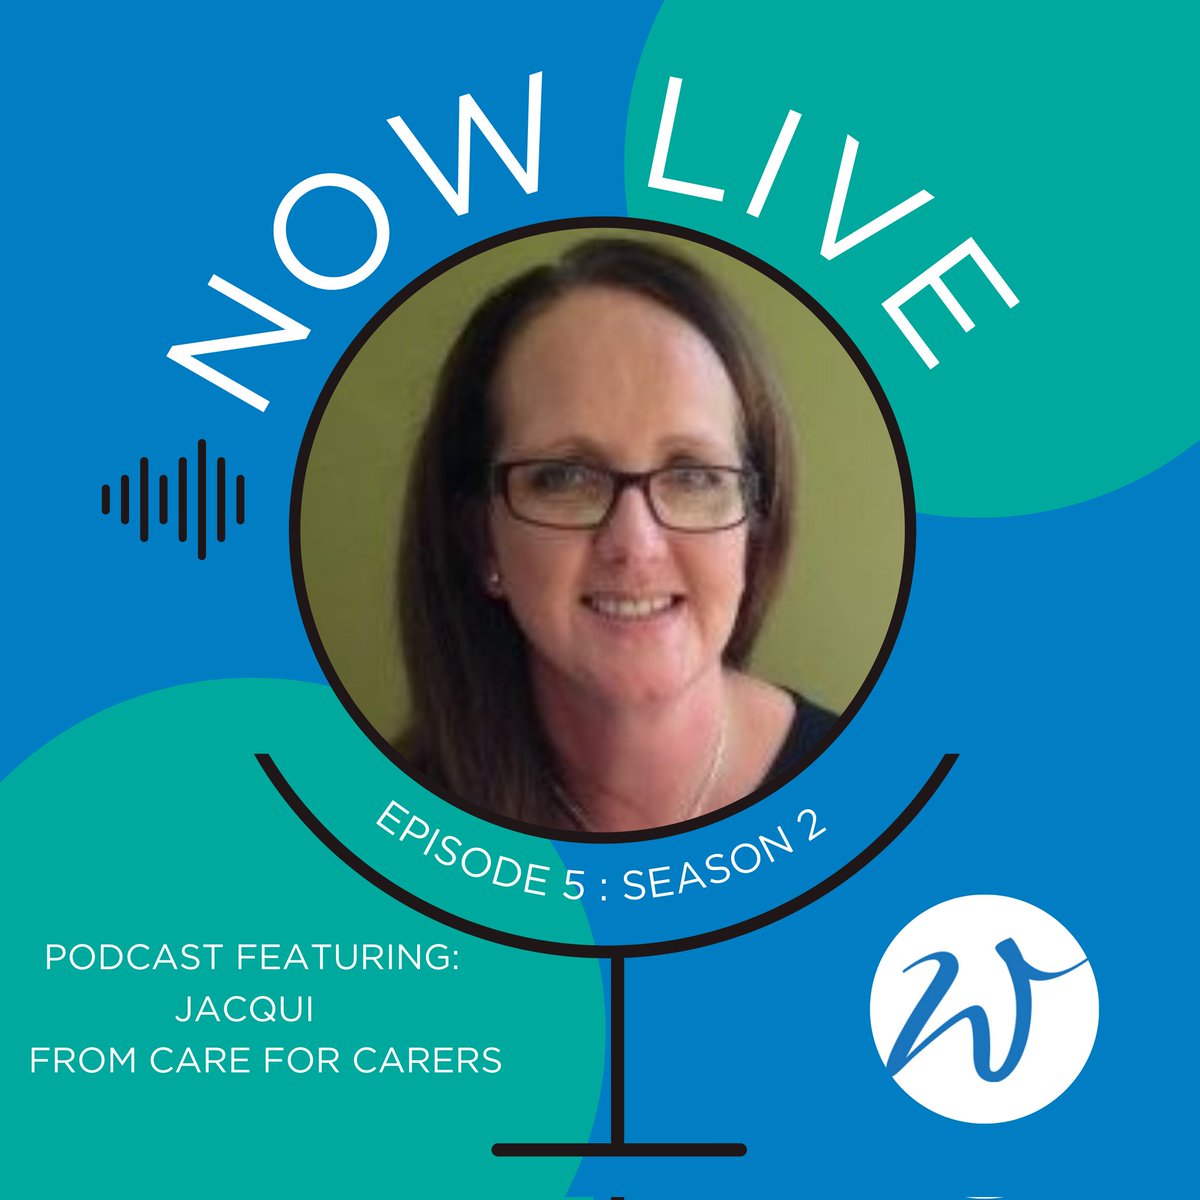 We are delighted to announce that season 2 of our podcast is LIVE! This episode we meet Jacqui from @Edincare4carers. Please do give us your thoughts: womensfundscotland.org/project-storie… #NowLive